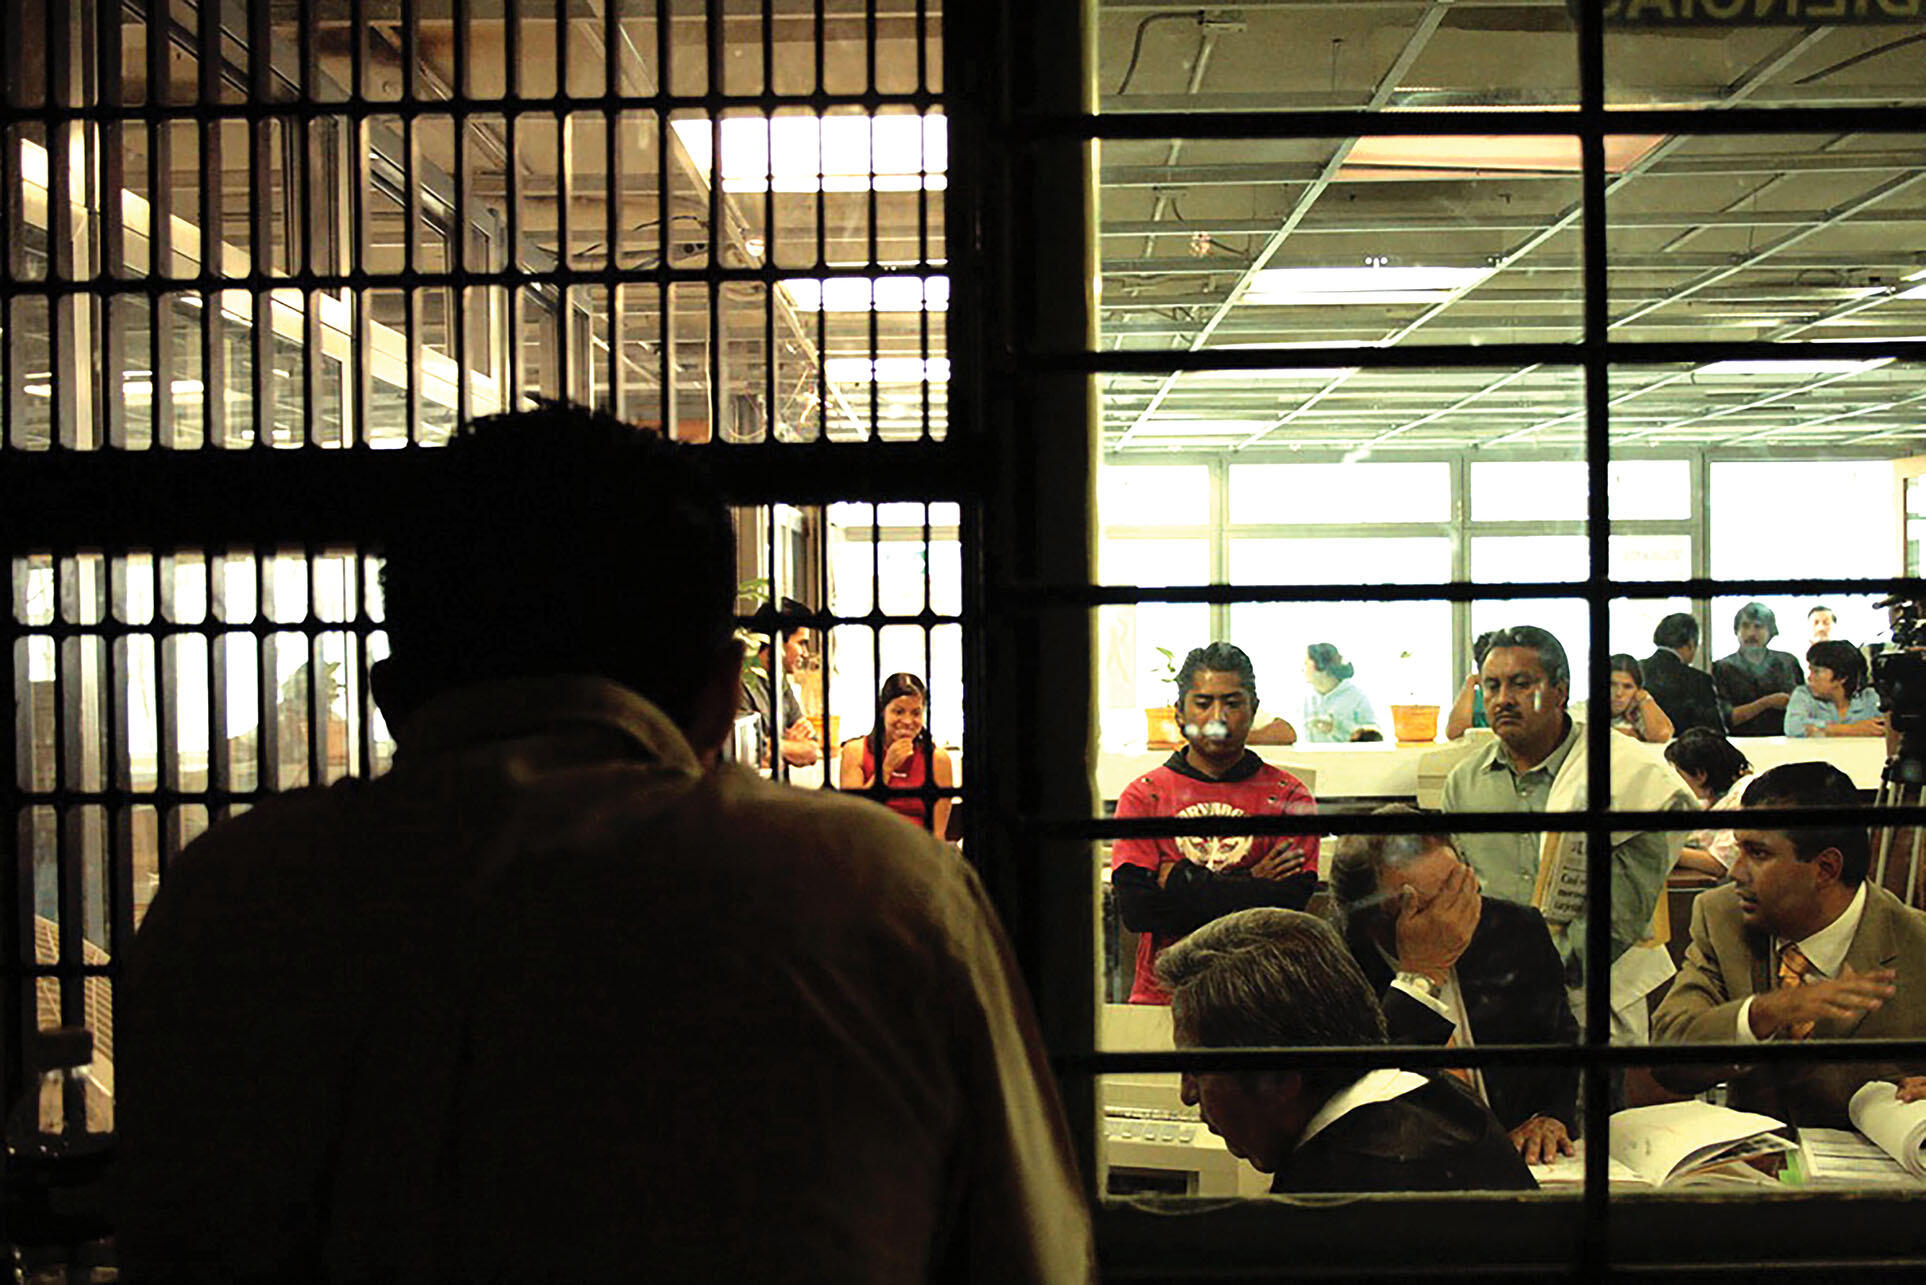 Toño Zúñiga stands behind bars in an old-style courtroom. (Photo courtesy of Layda Negrete and Roberto Hernández.)